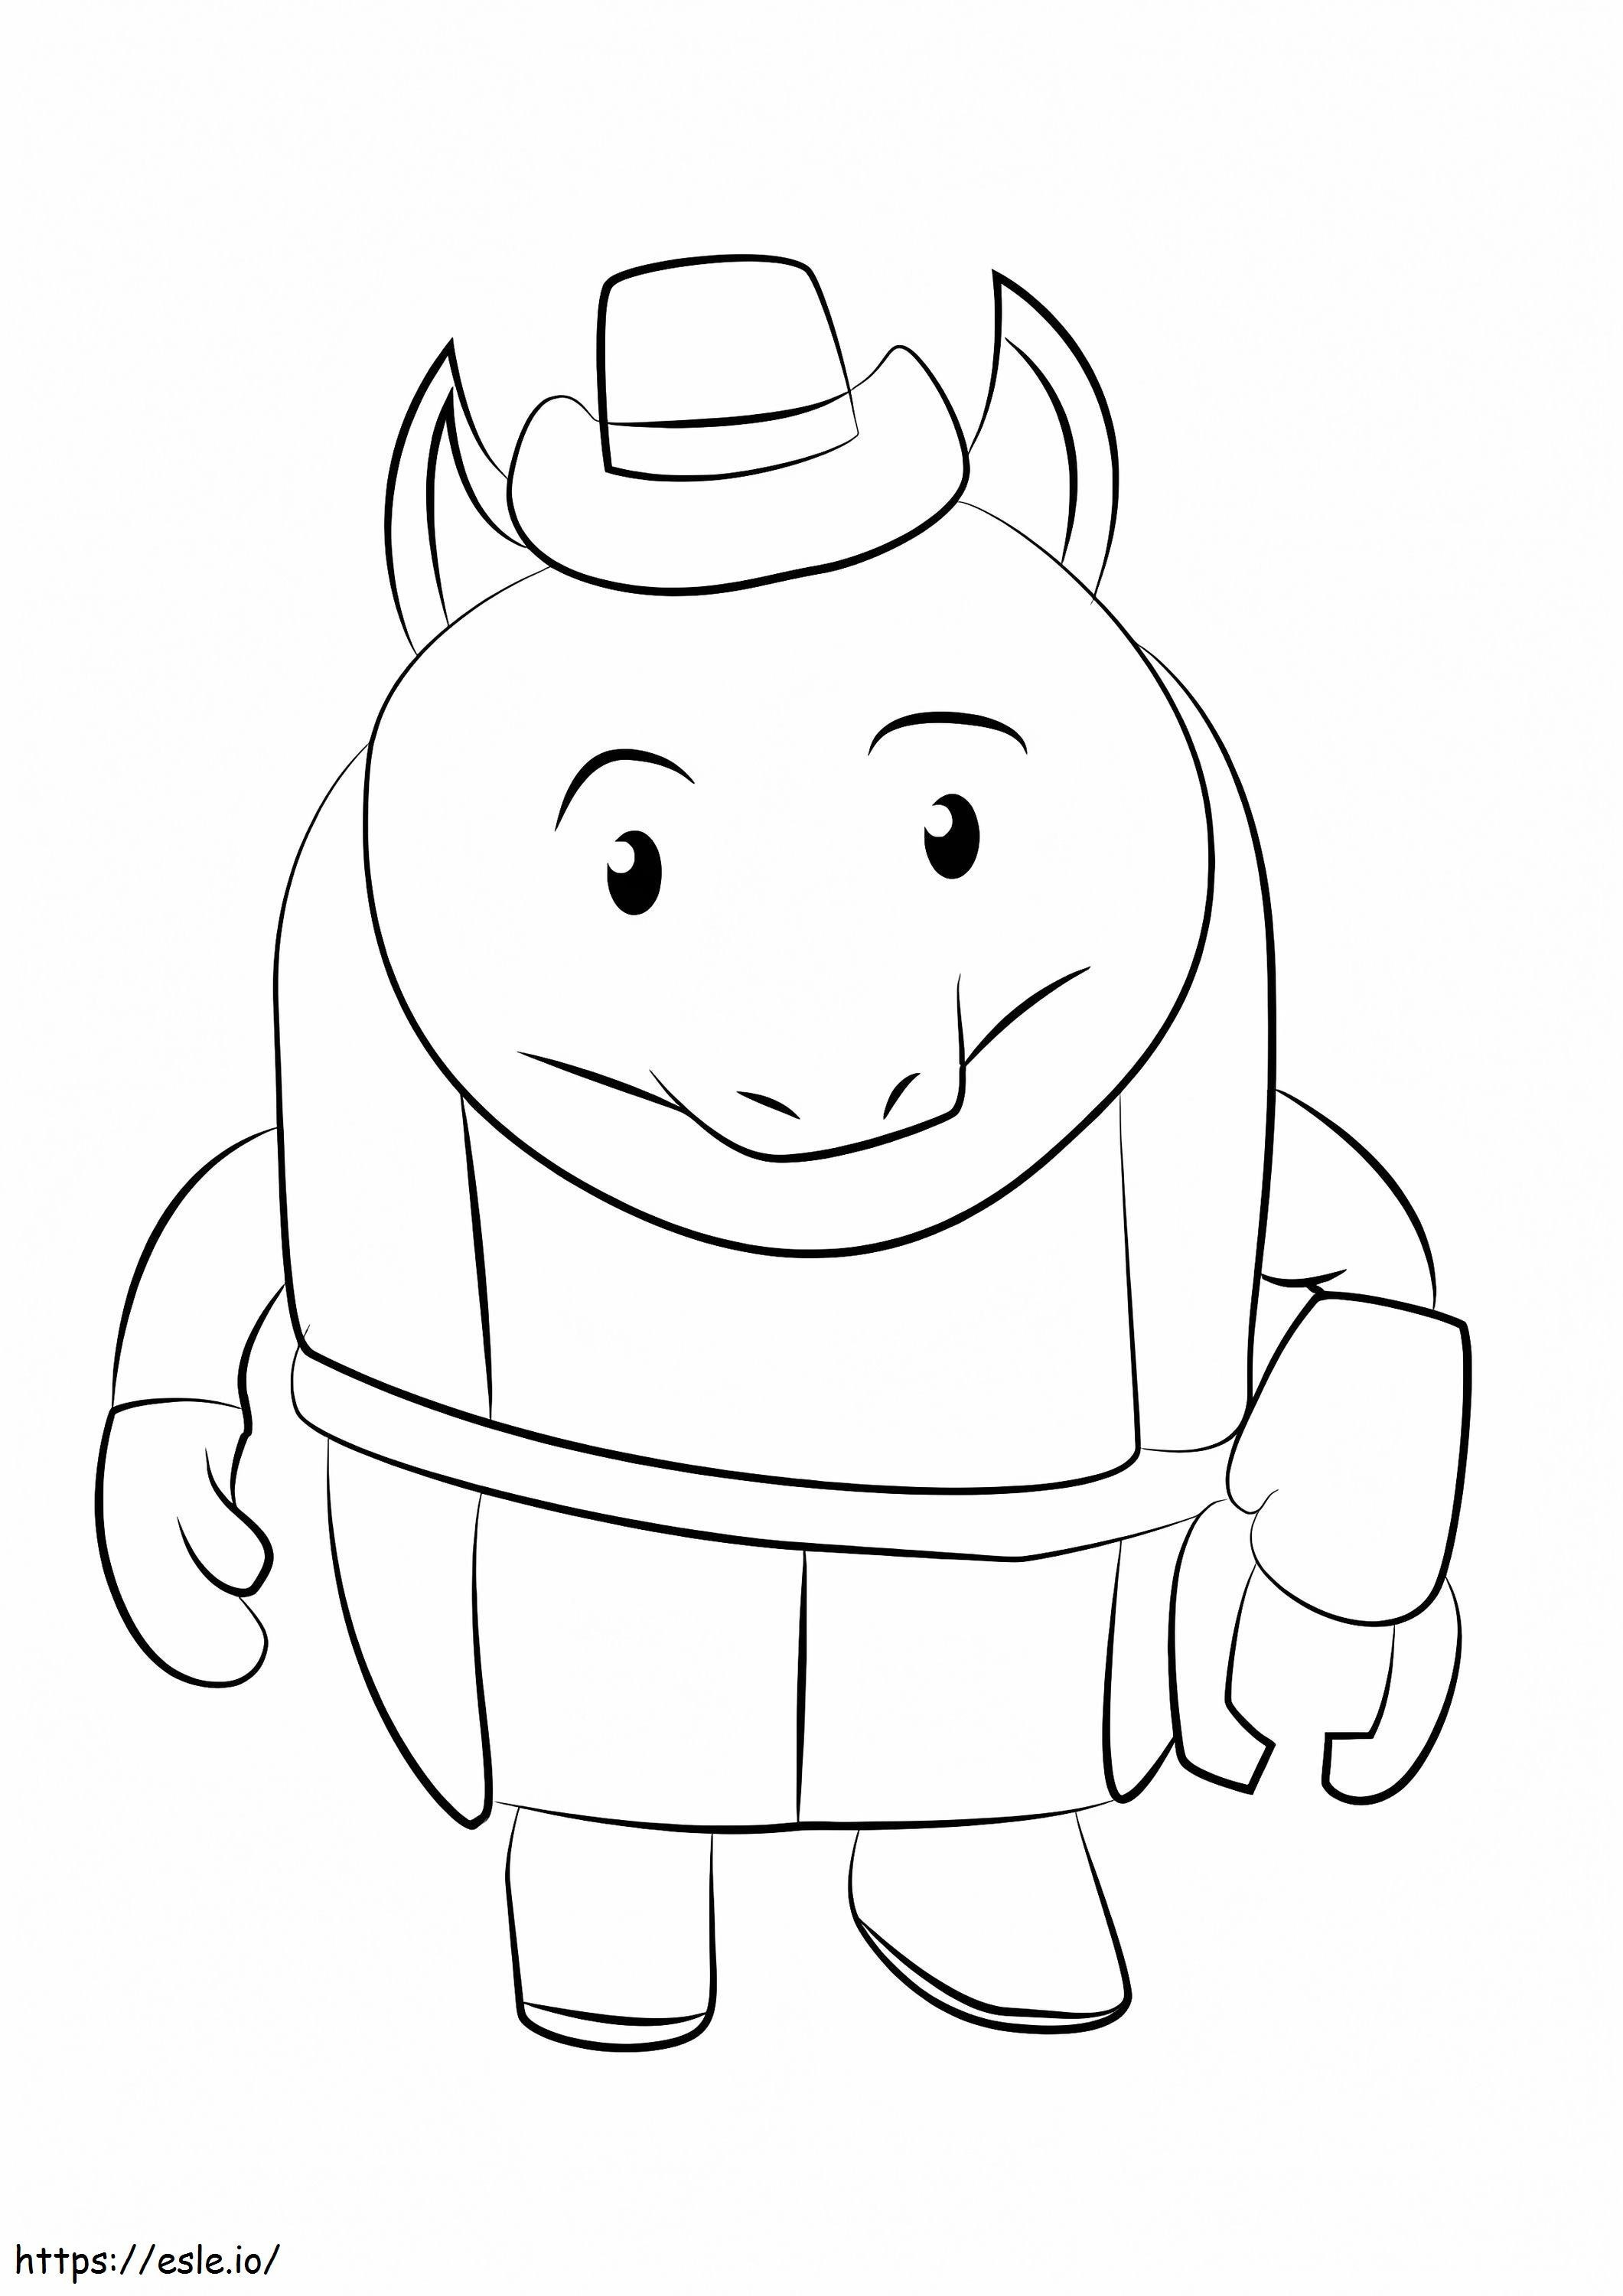 Mr. Dillo From Sheriff Callie coloring page